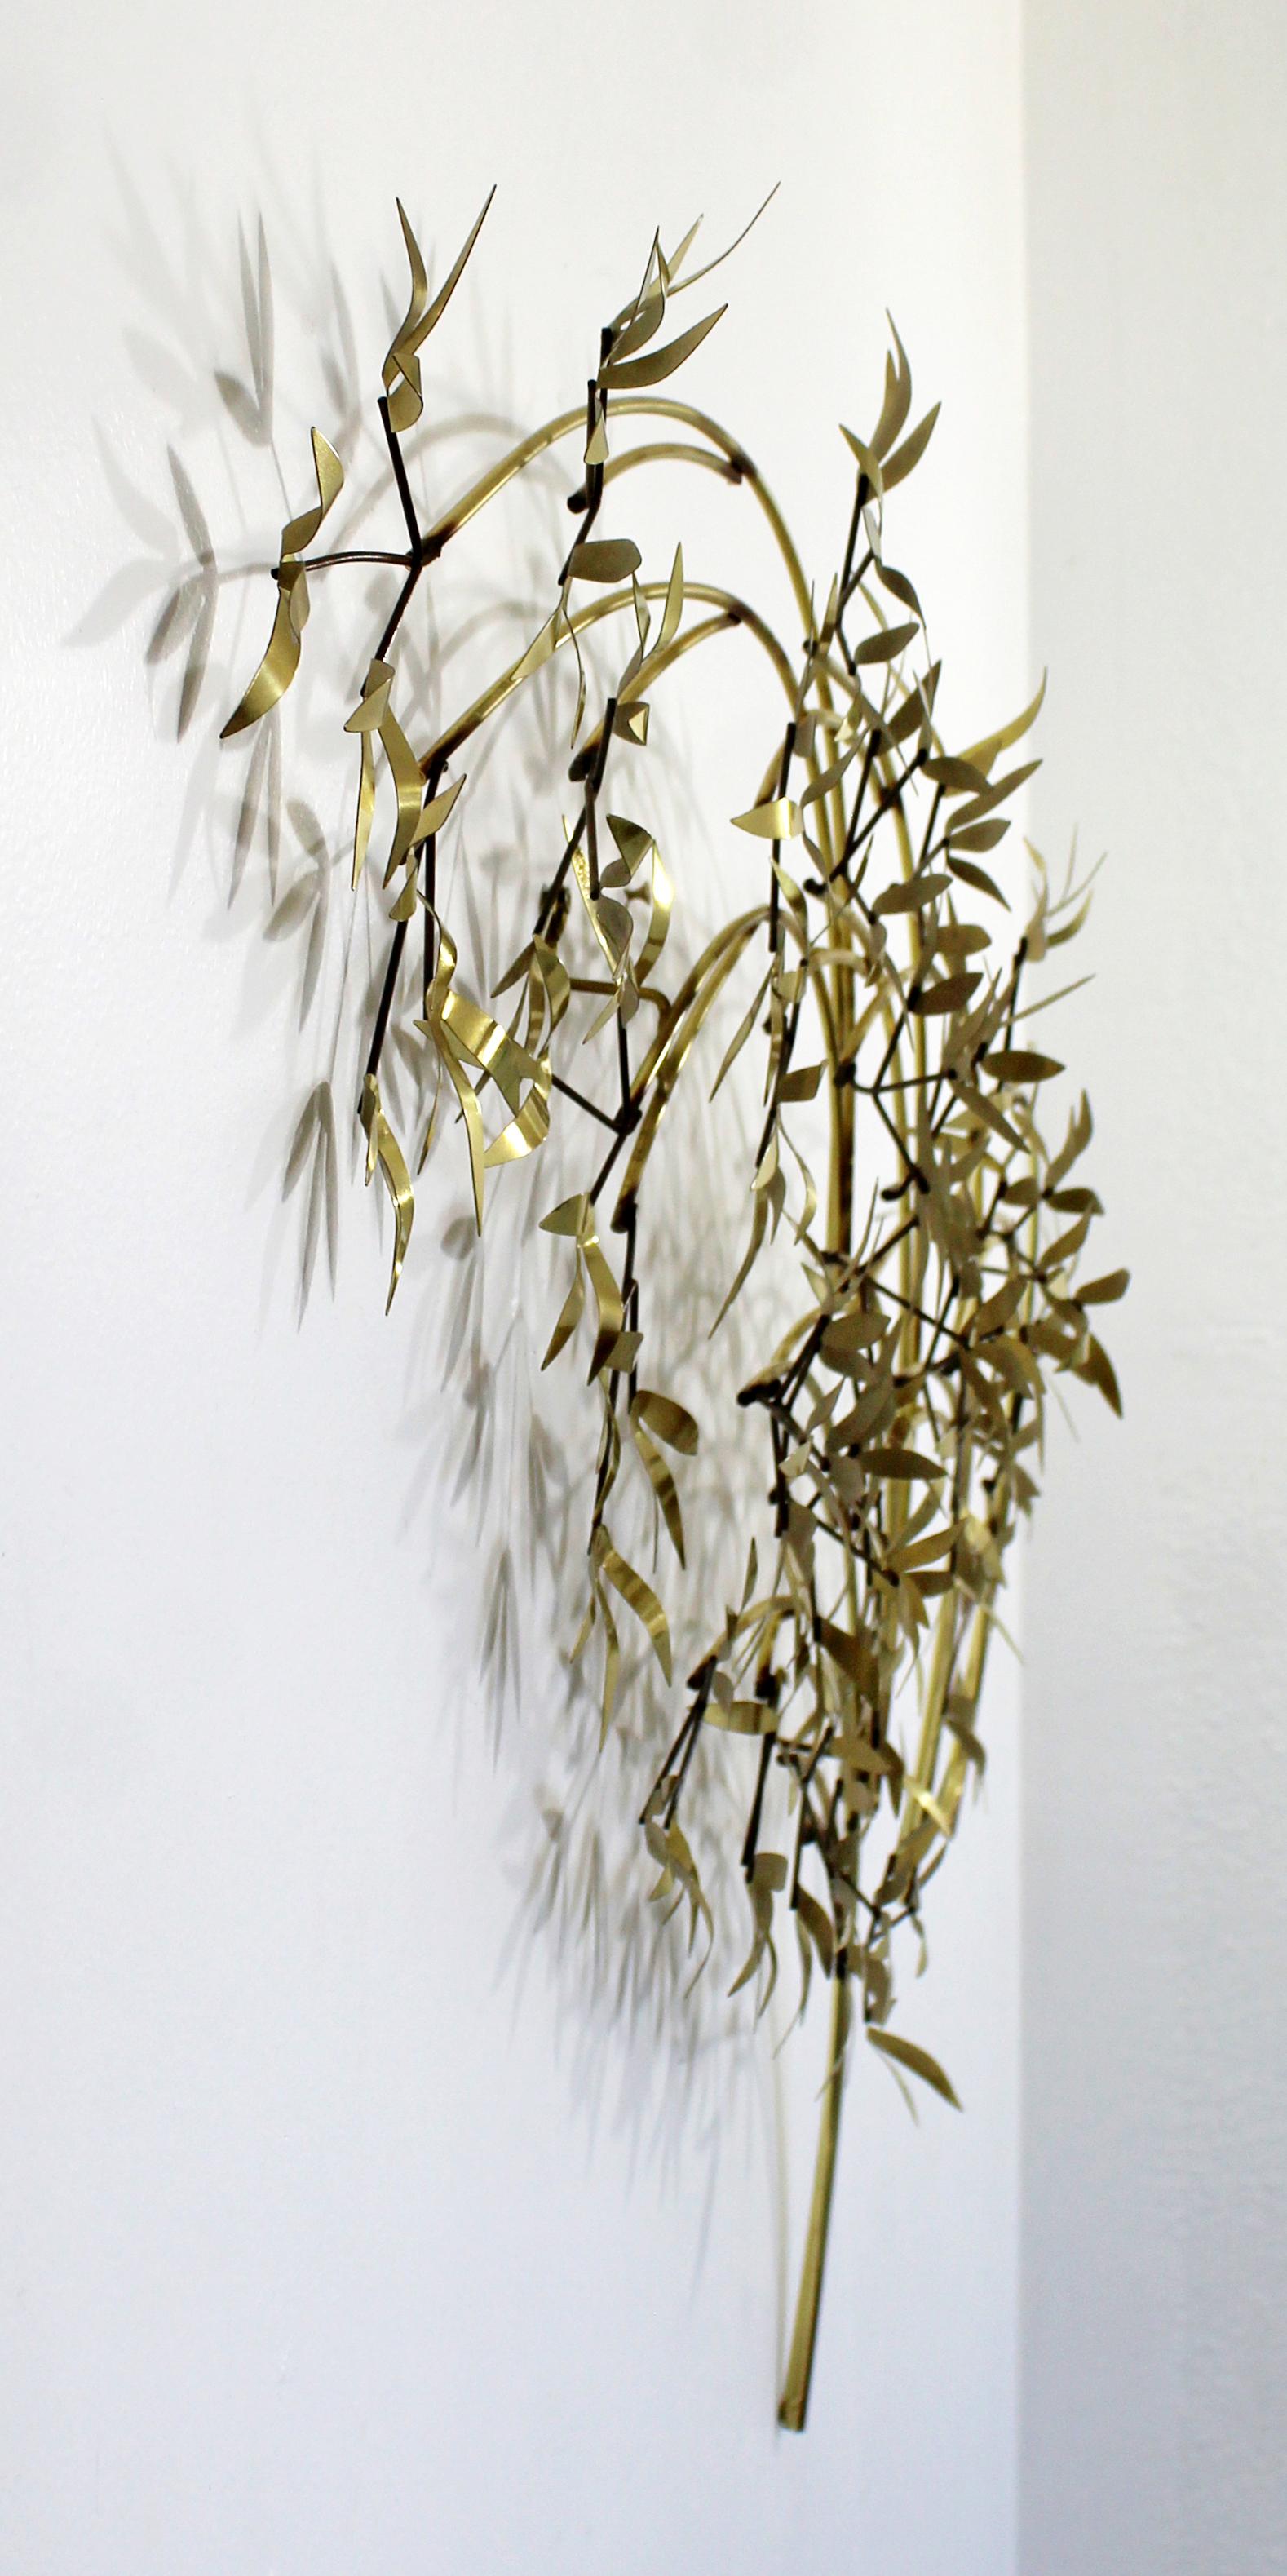 Late 20th Century Contemporary Modern C. Jere Signed Brass Willow Tree Wall Sculpture Dated 1980s